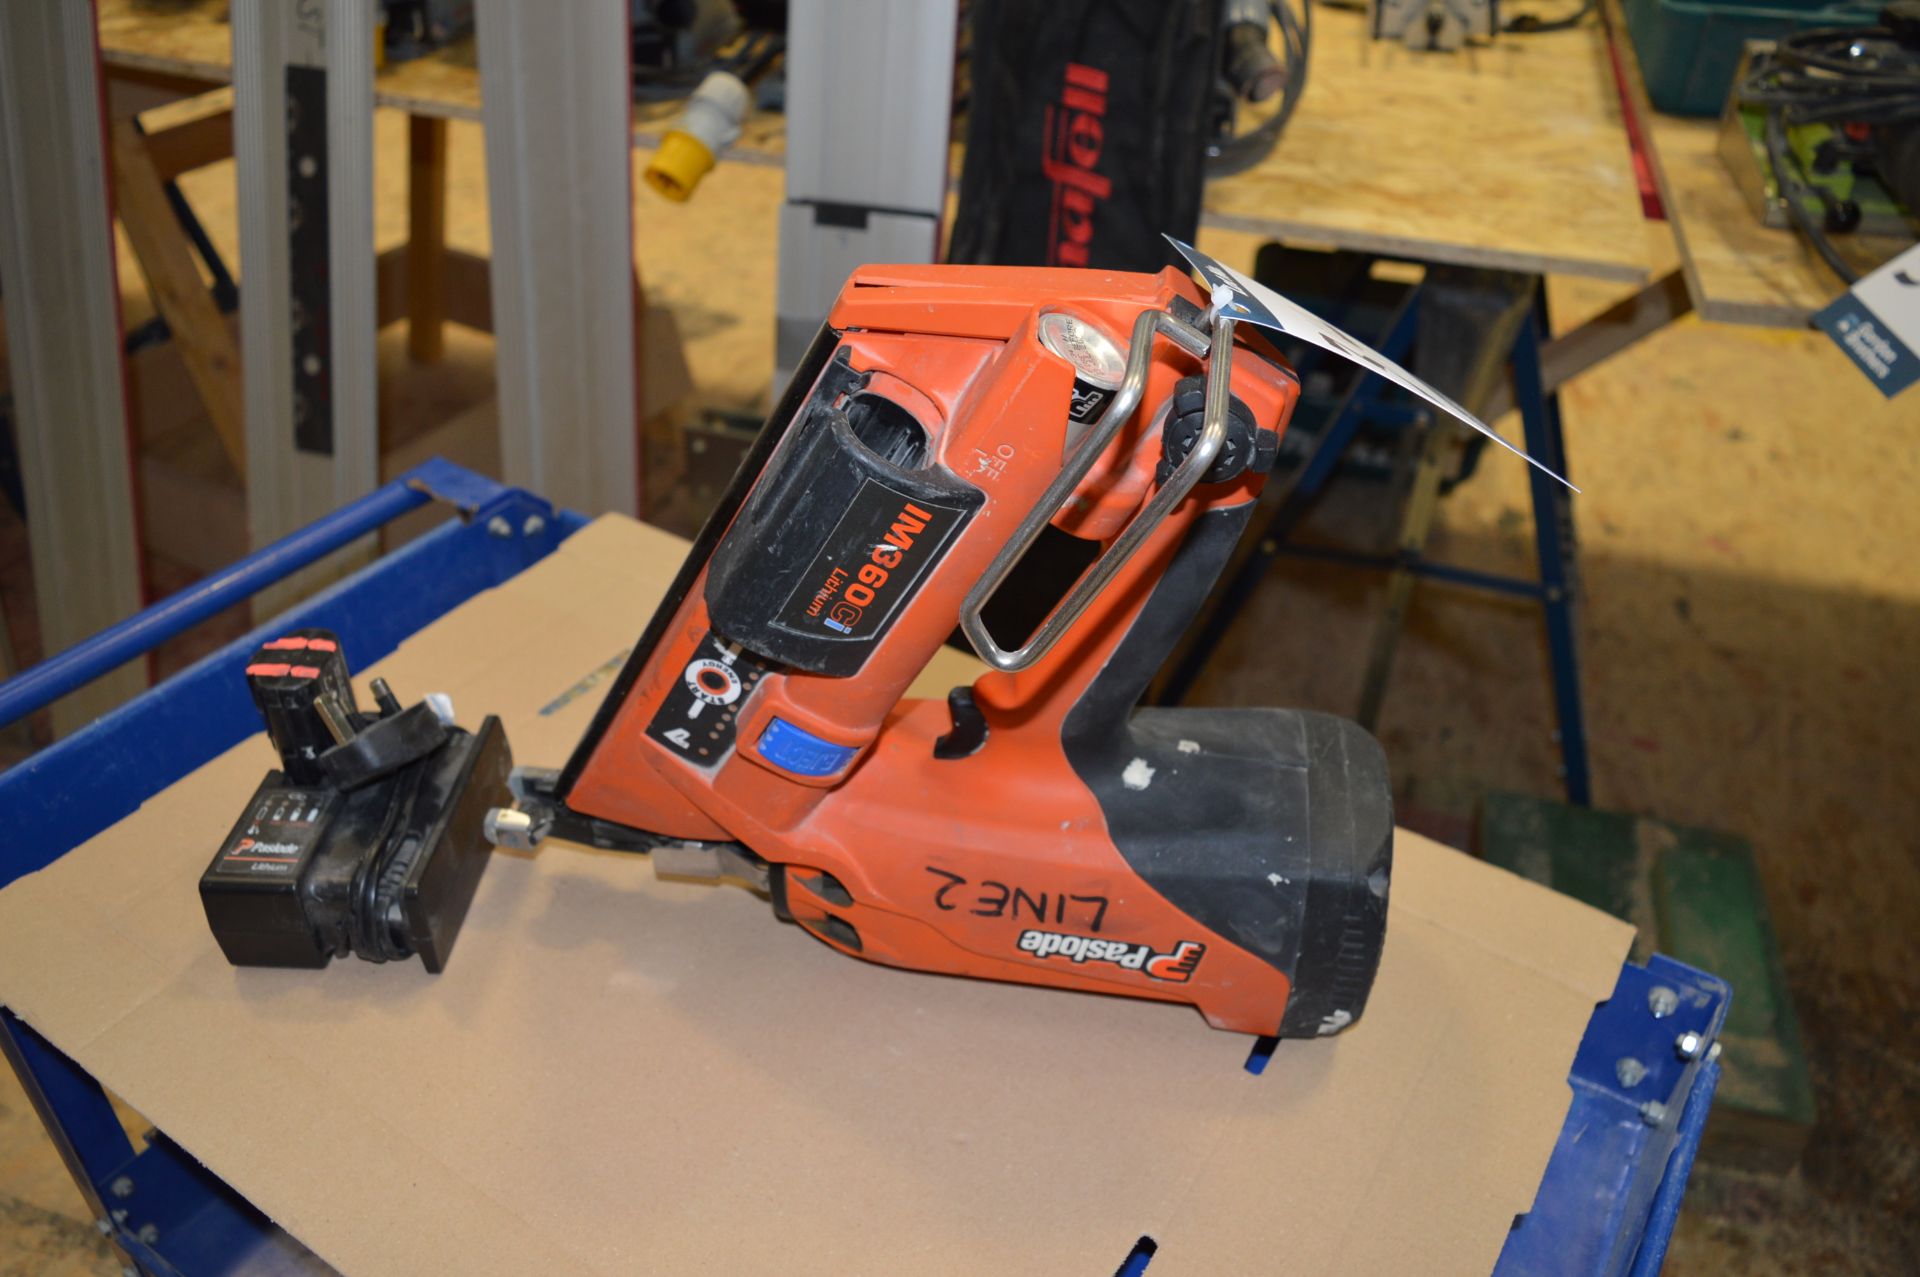 Paslode, gas operated nail gun, Model 1M360Ci lithium with battery and charger